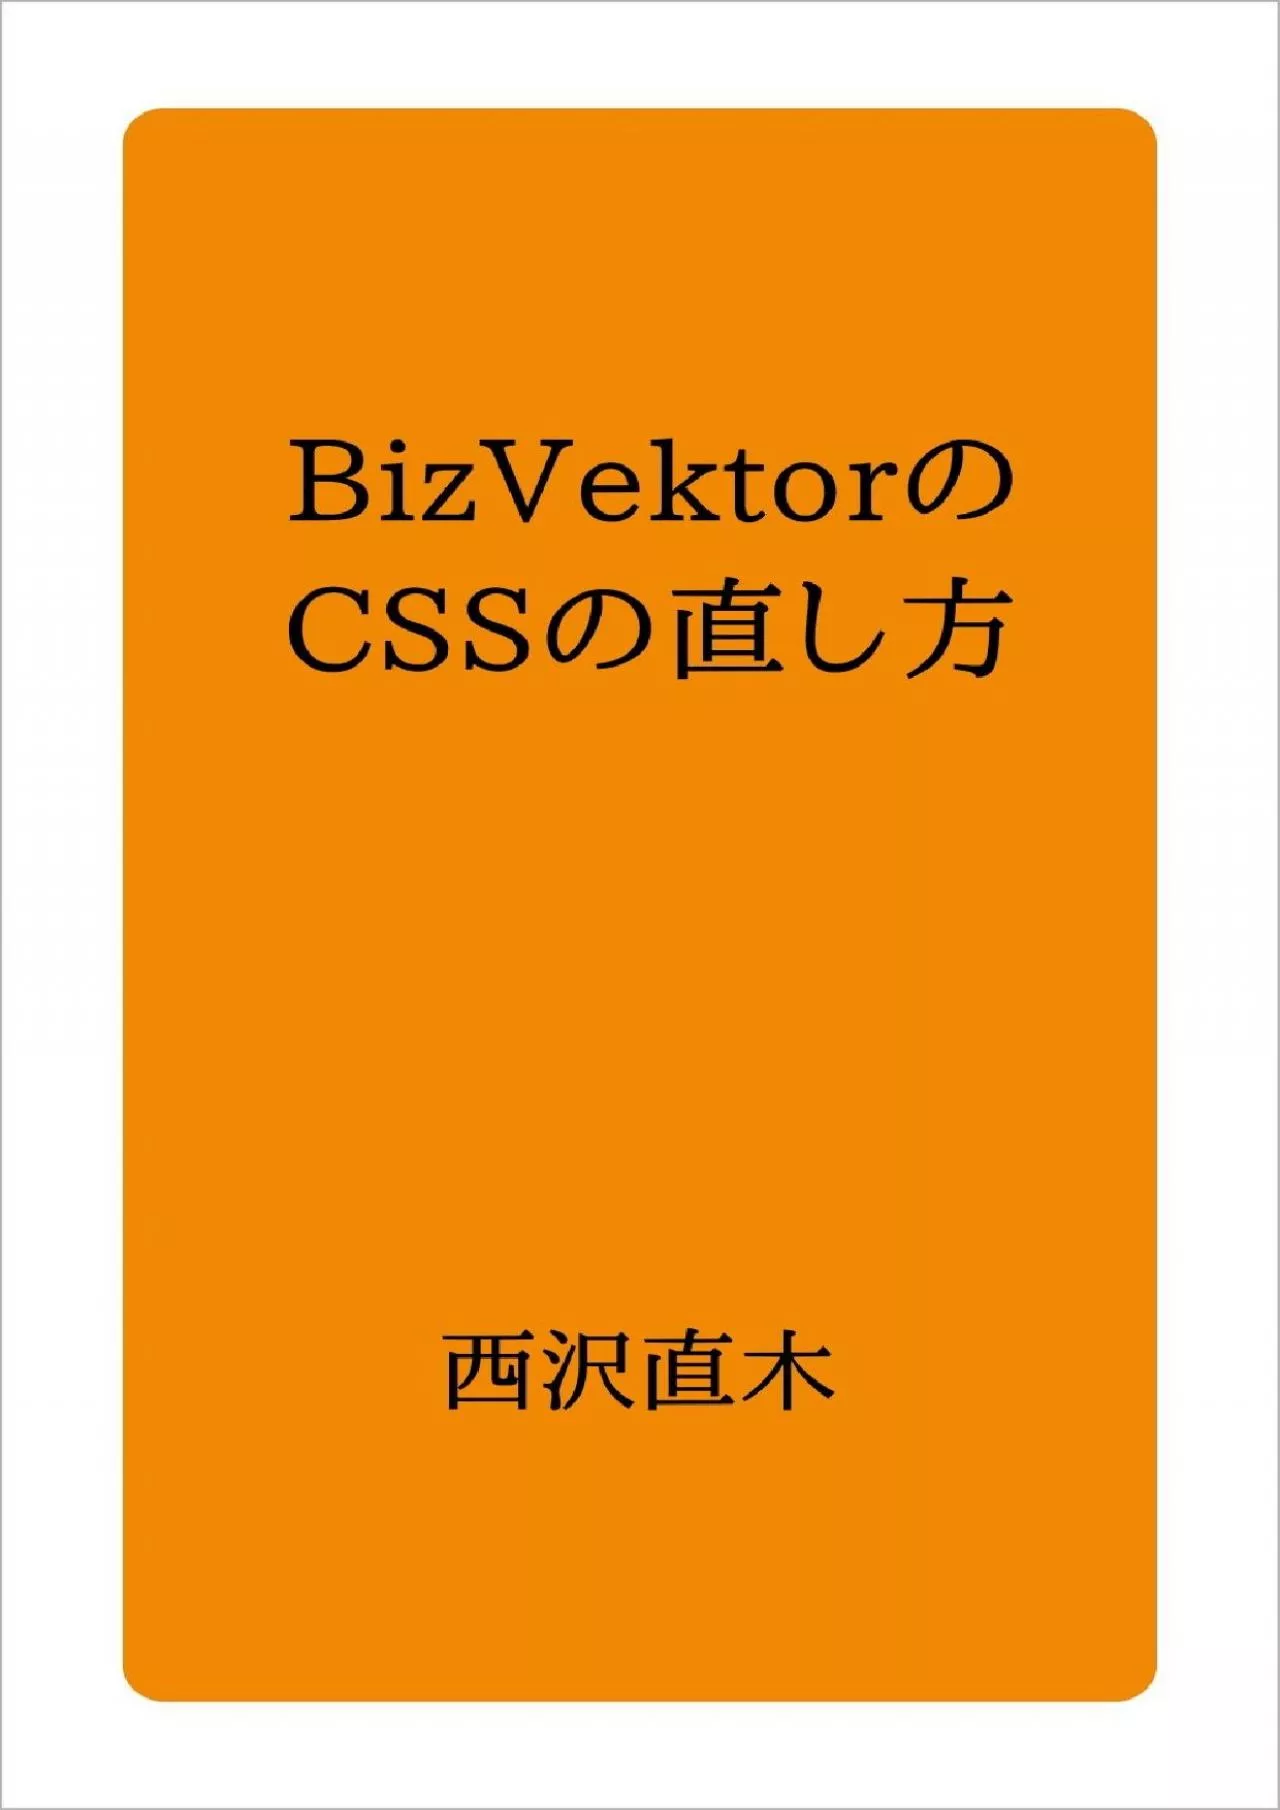 (READ)-How To Customize CSS of BizVektor (Japanese Edition)